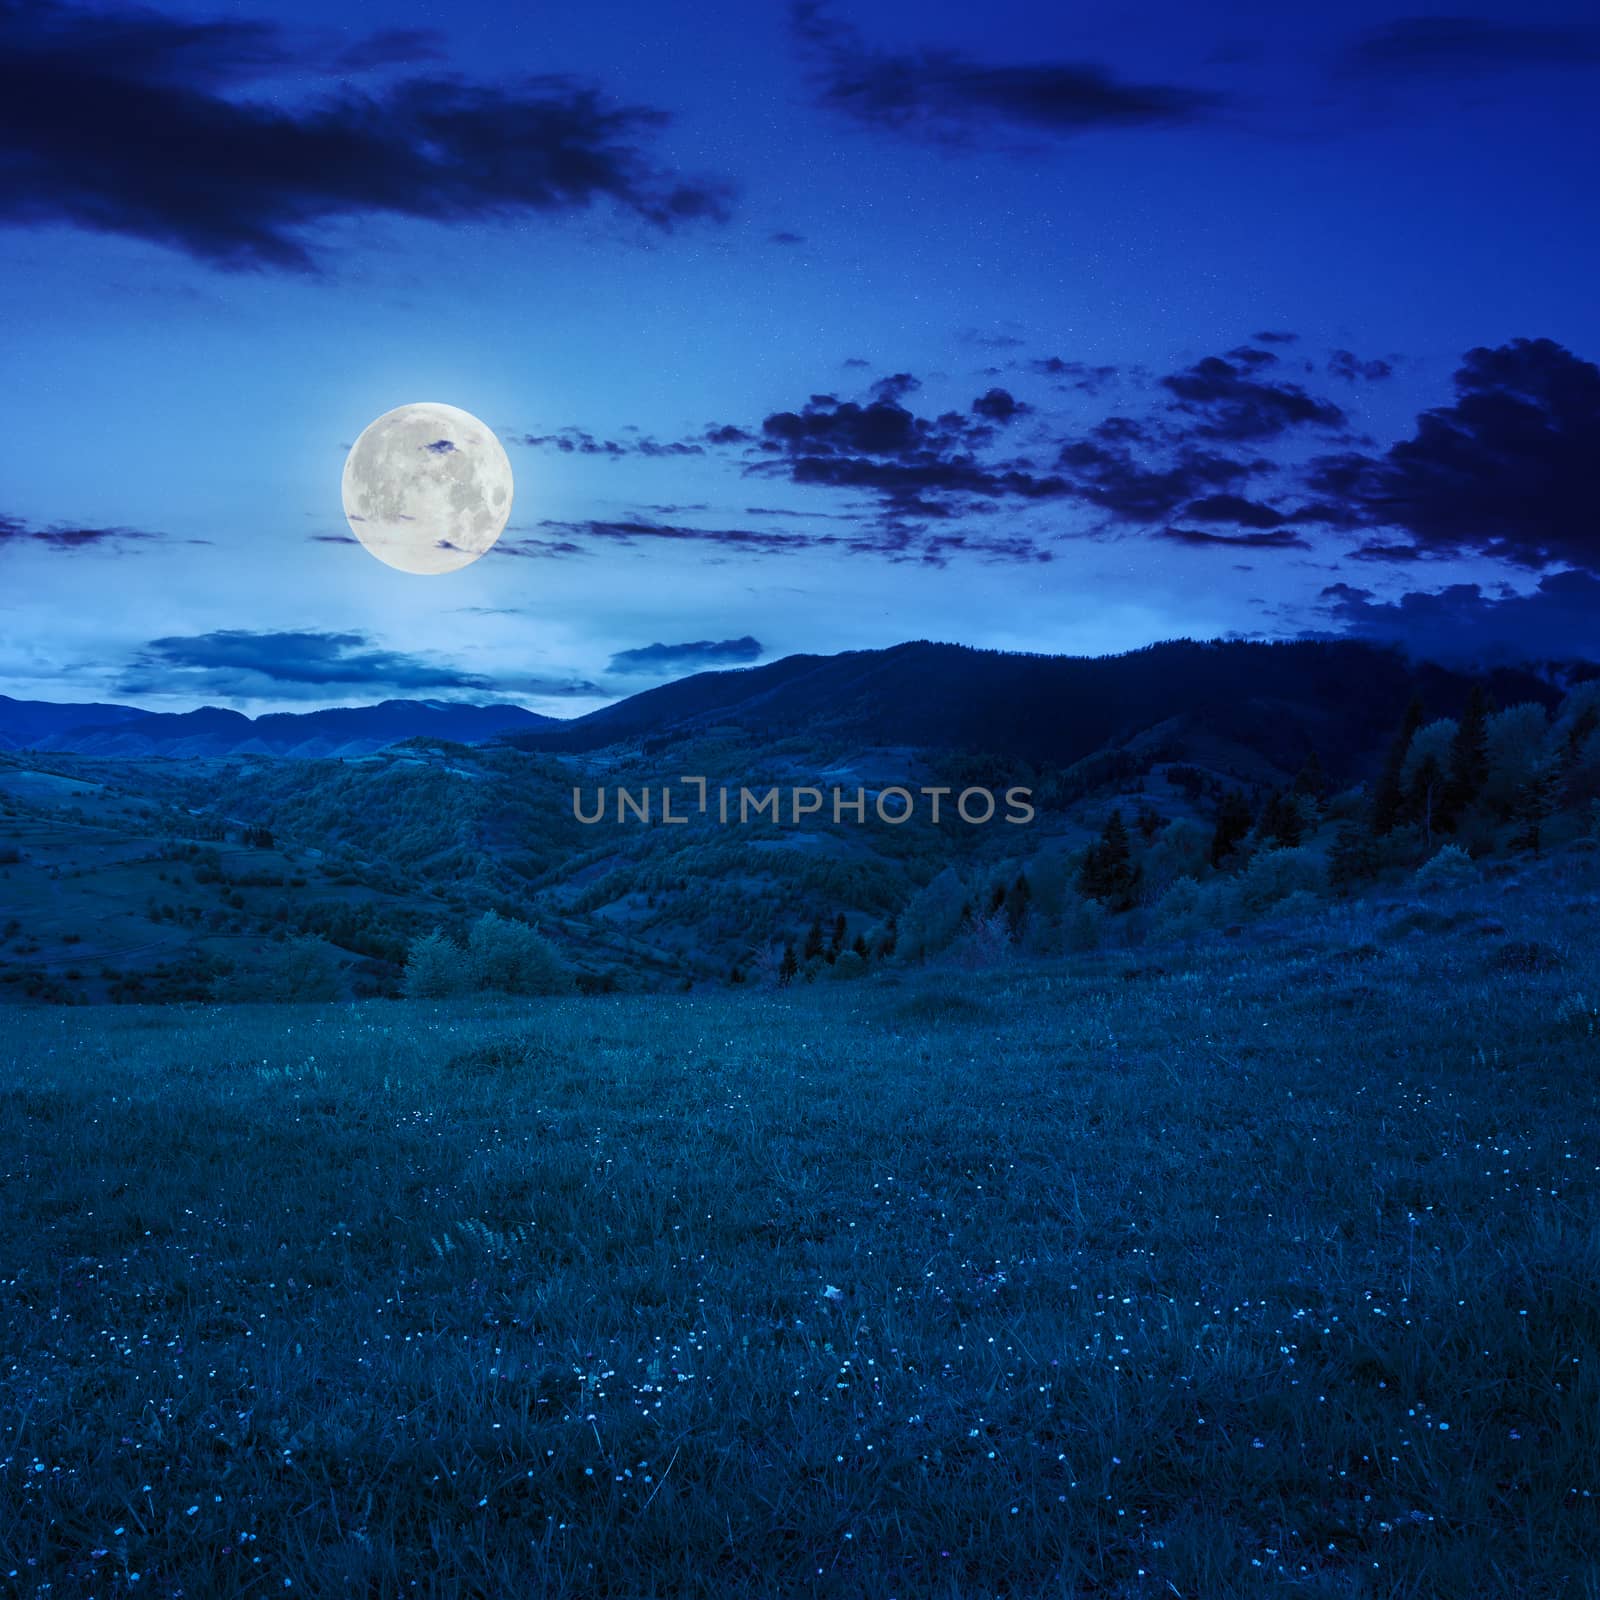 mountain summer landscape. trees near meadow and forest on hillside at night in moonlight